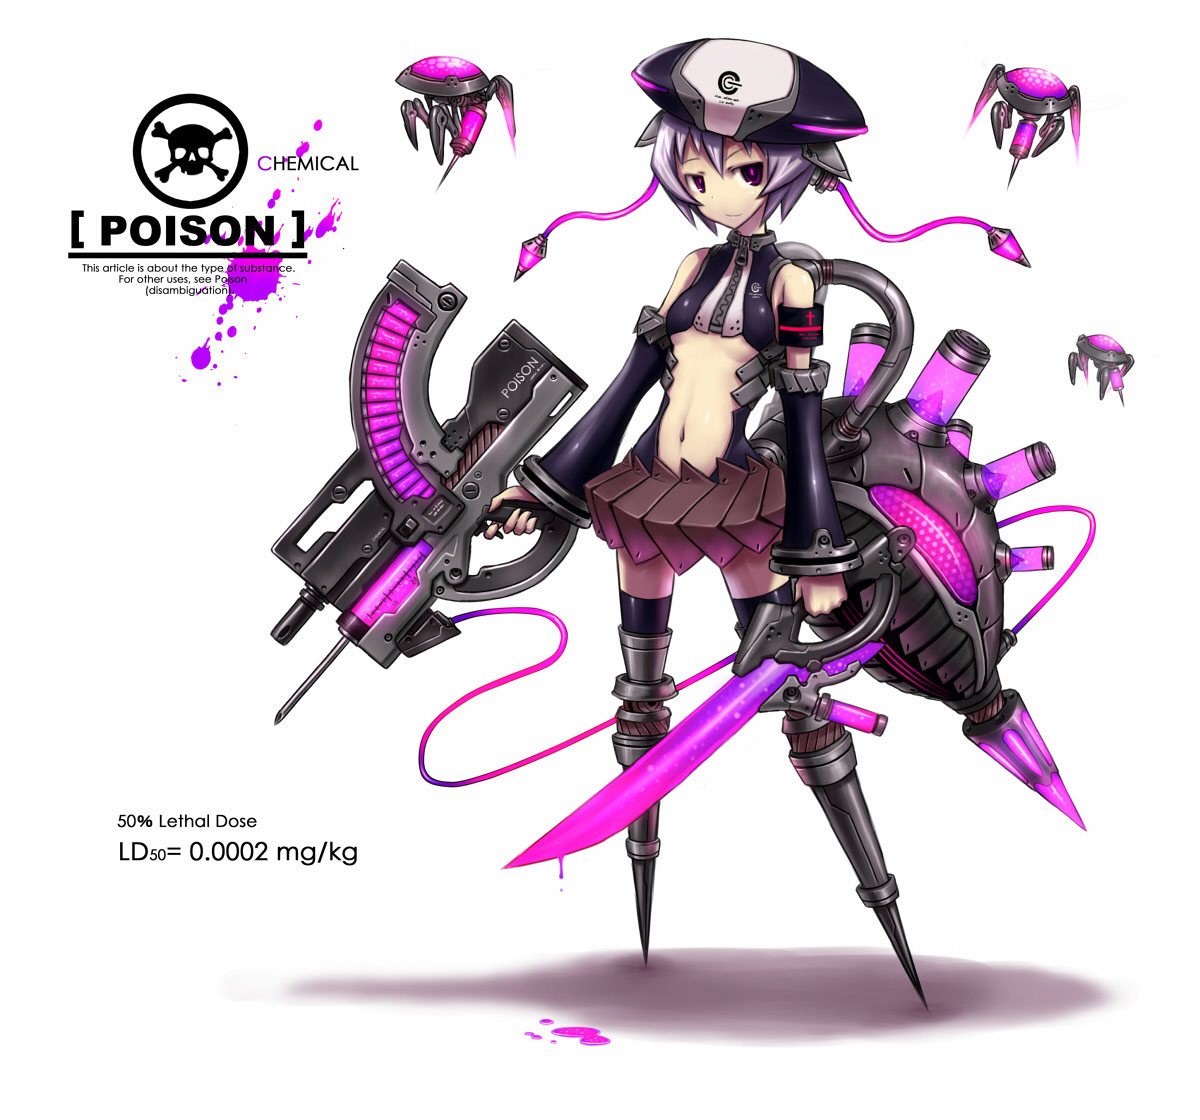 Images of Pixiv: Moefication Of Chemicals | 1200x1120